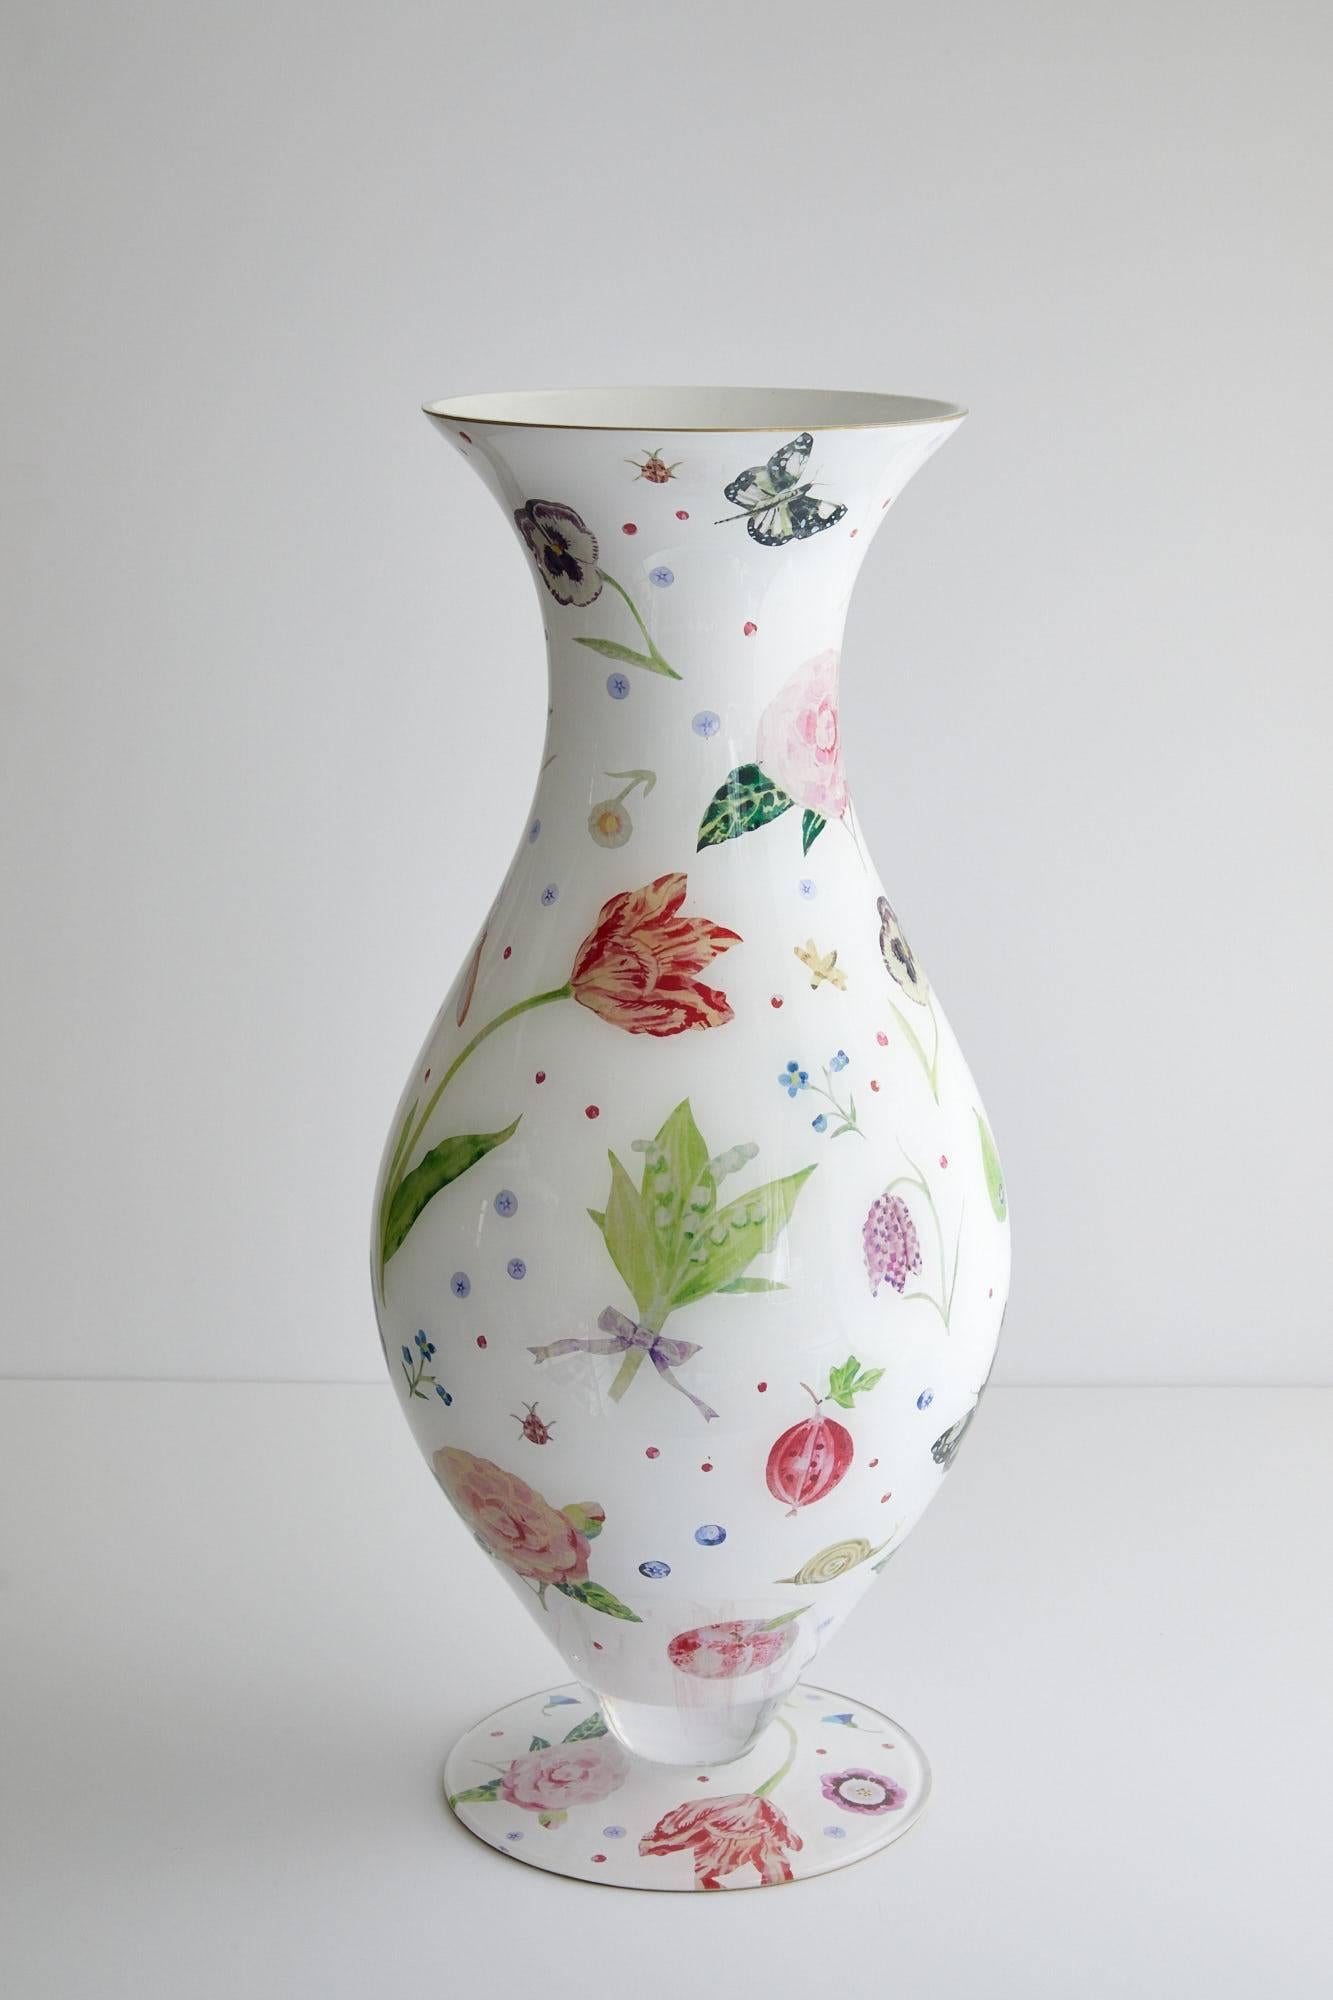 Handmade decoupage Parisian vase, designed by Cathy Graham crafted by Scott Potter.